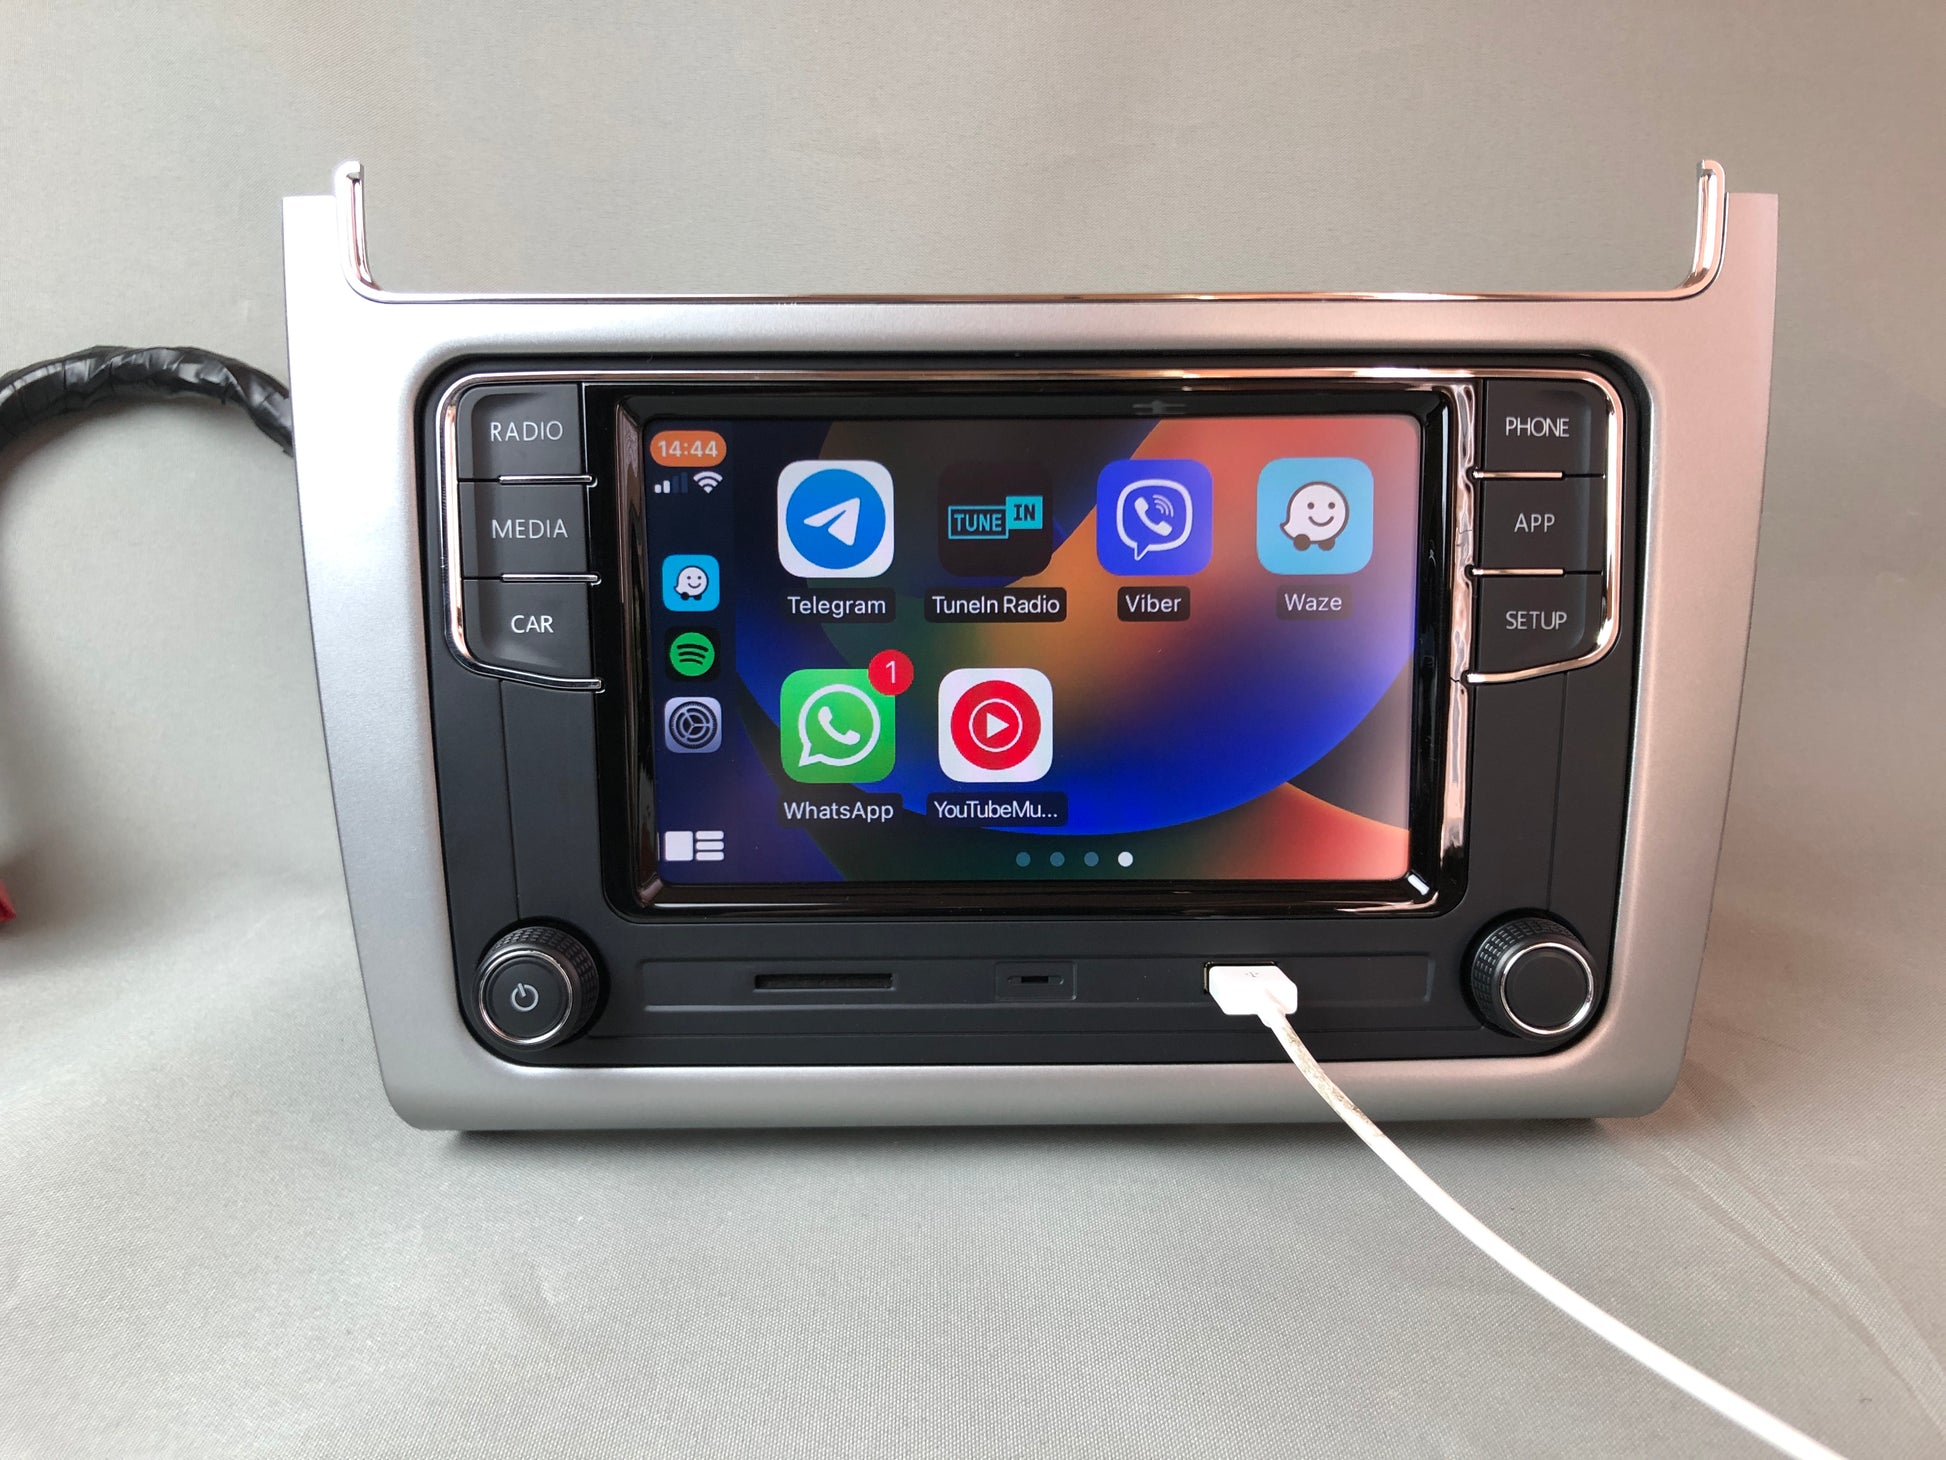 VW RCD360 Pro Apple CarPlay Android Auto Stereo (Volkswagen)